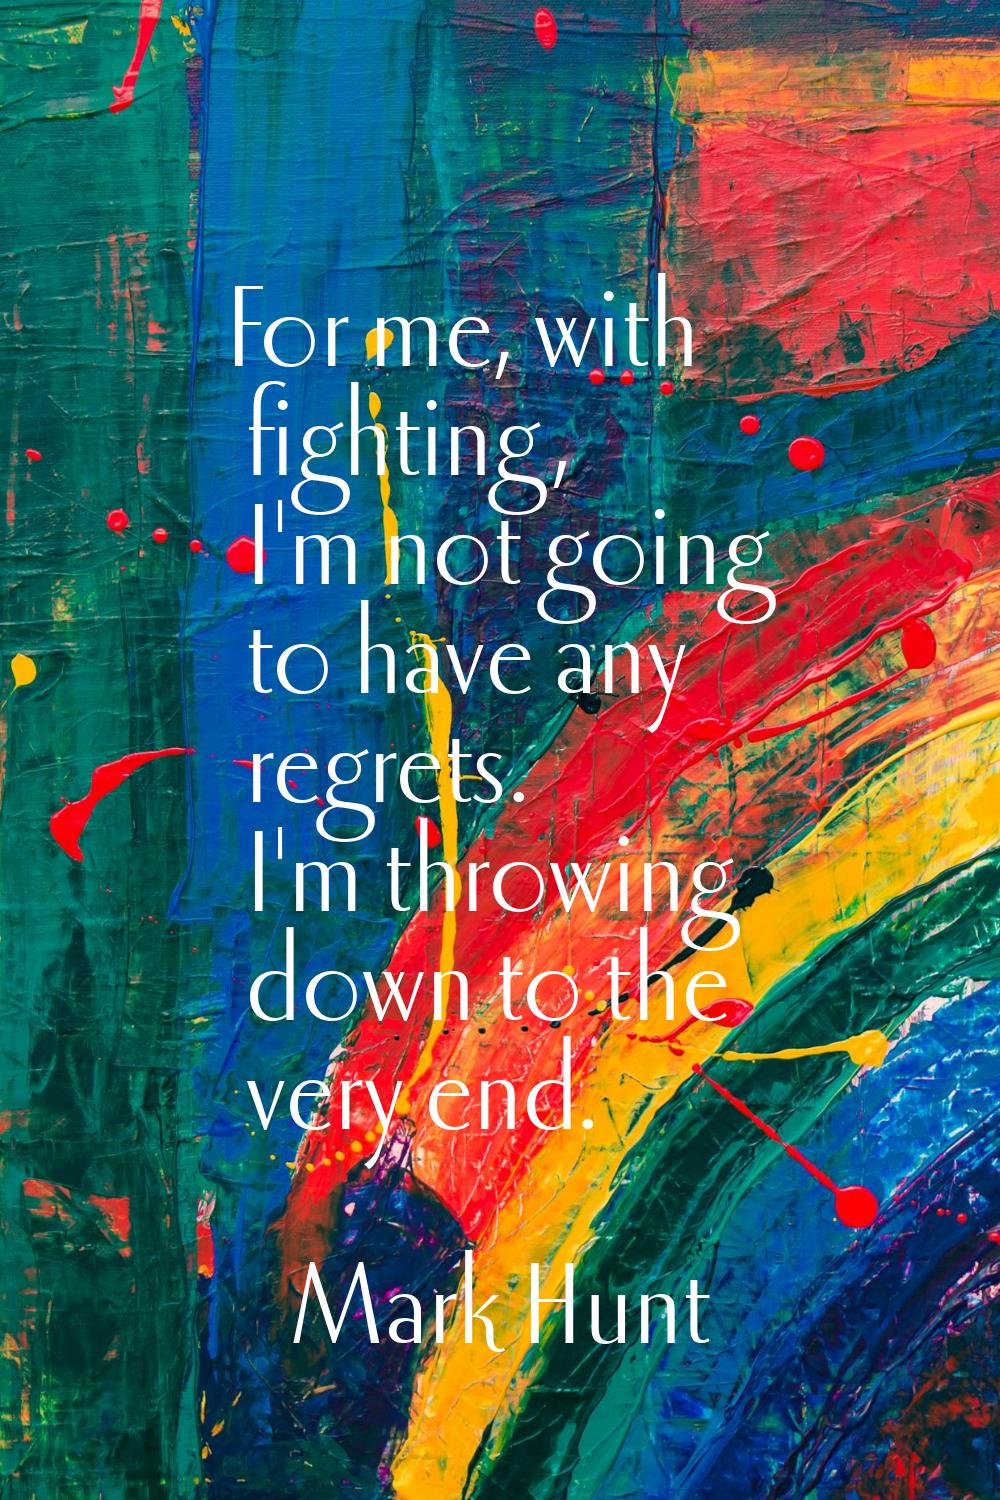 For me, with fighting, I'm not going to have any regrets. I'm throwing down to the very end.